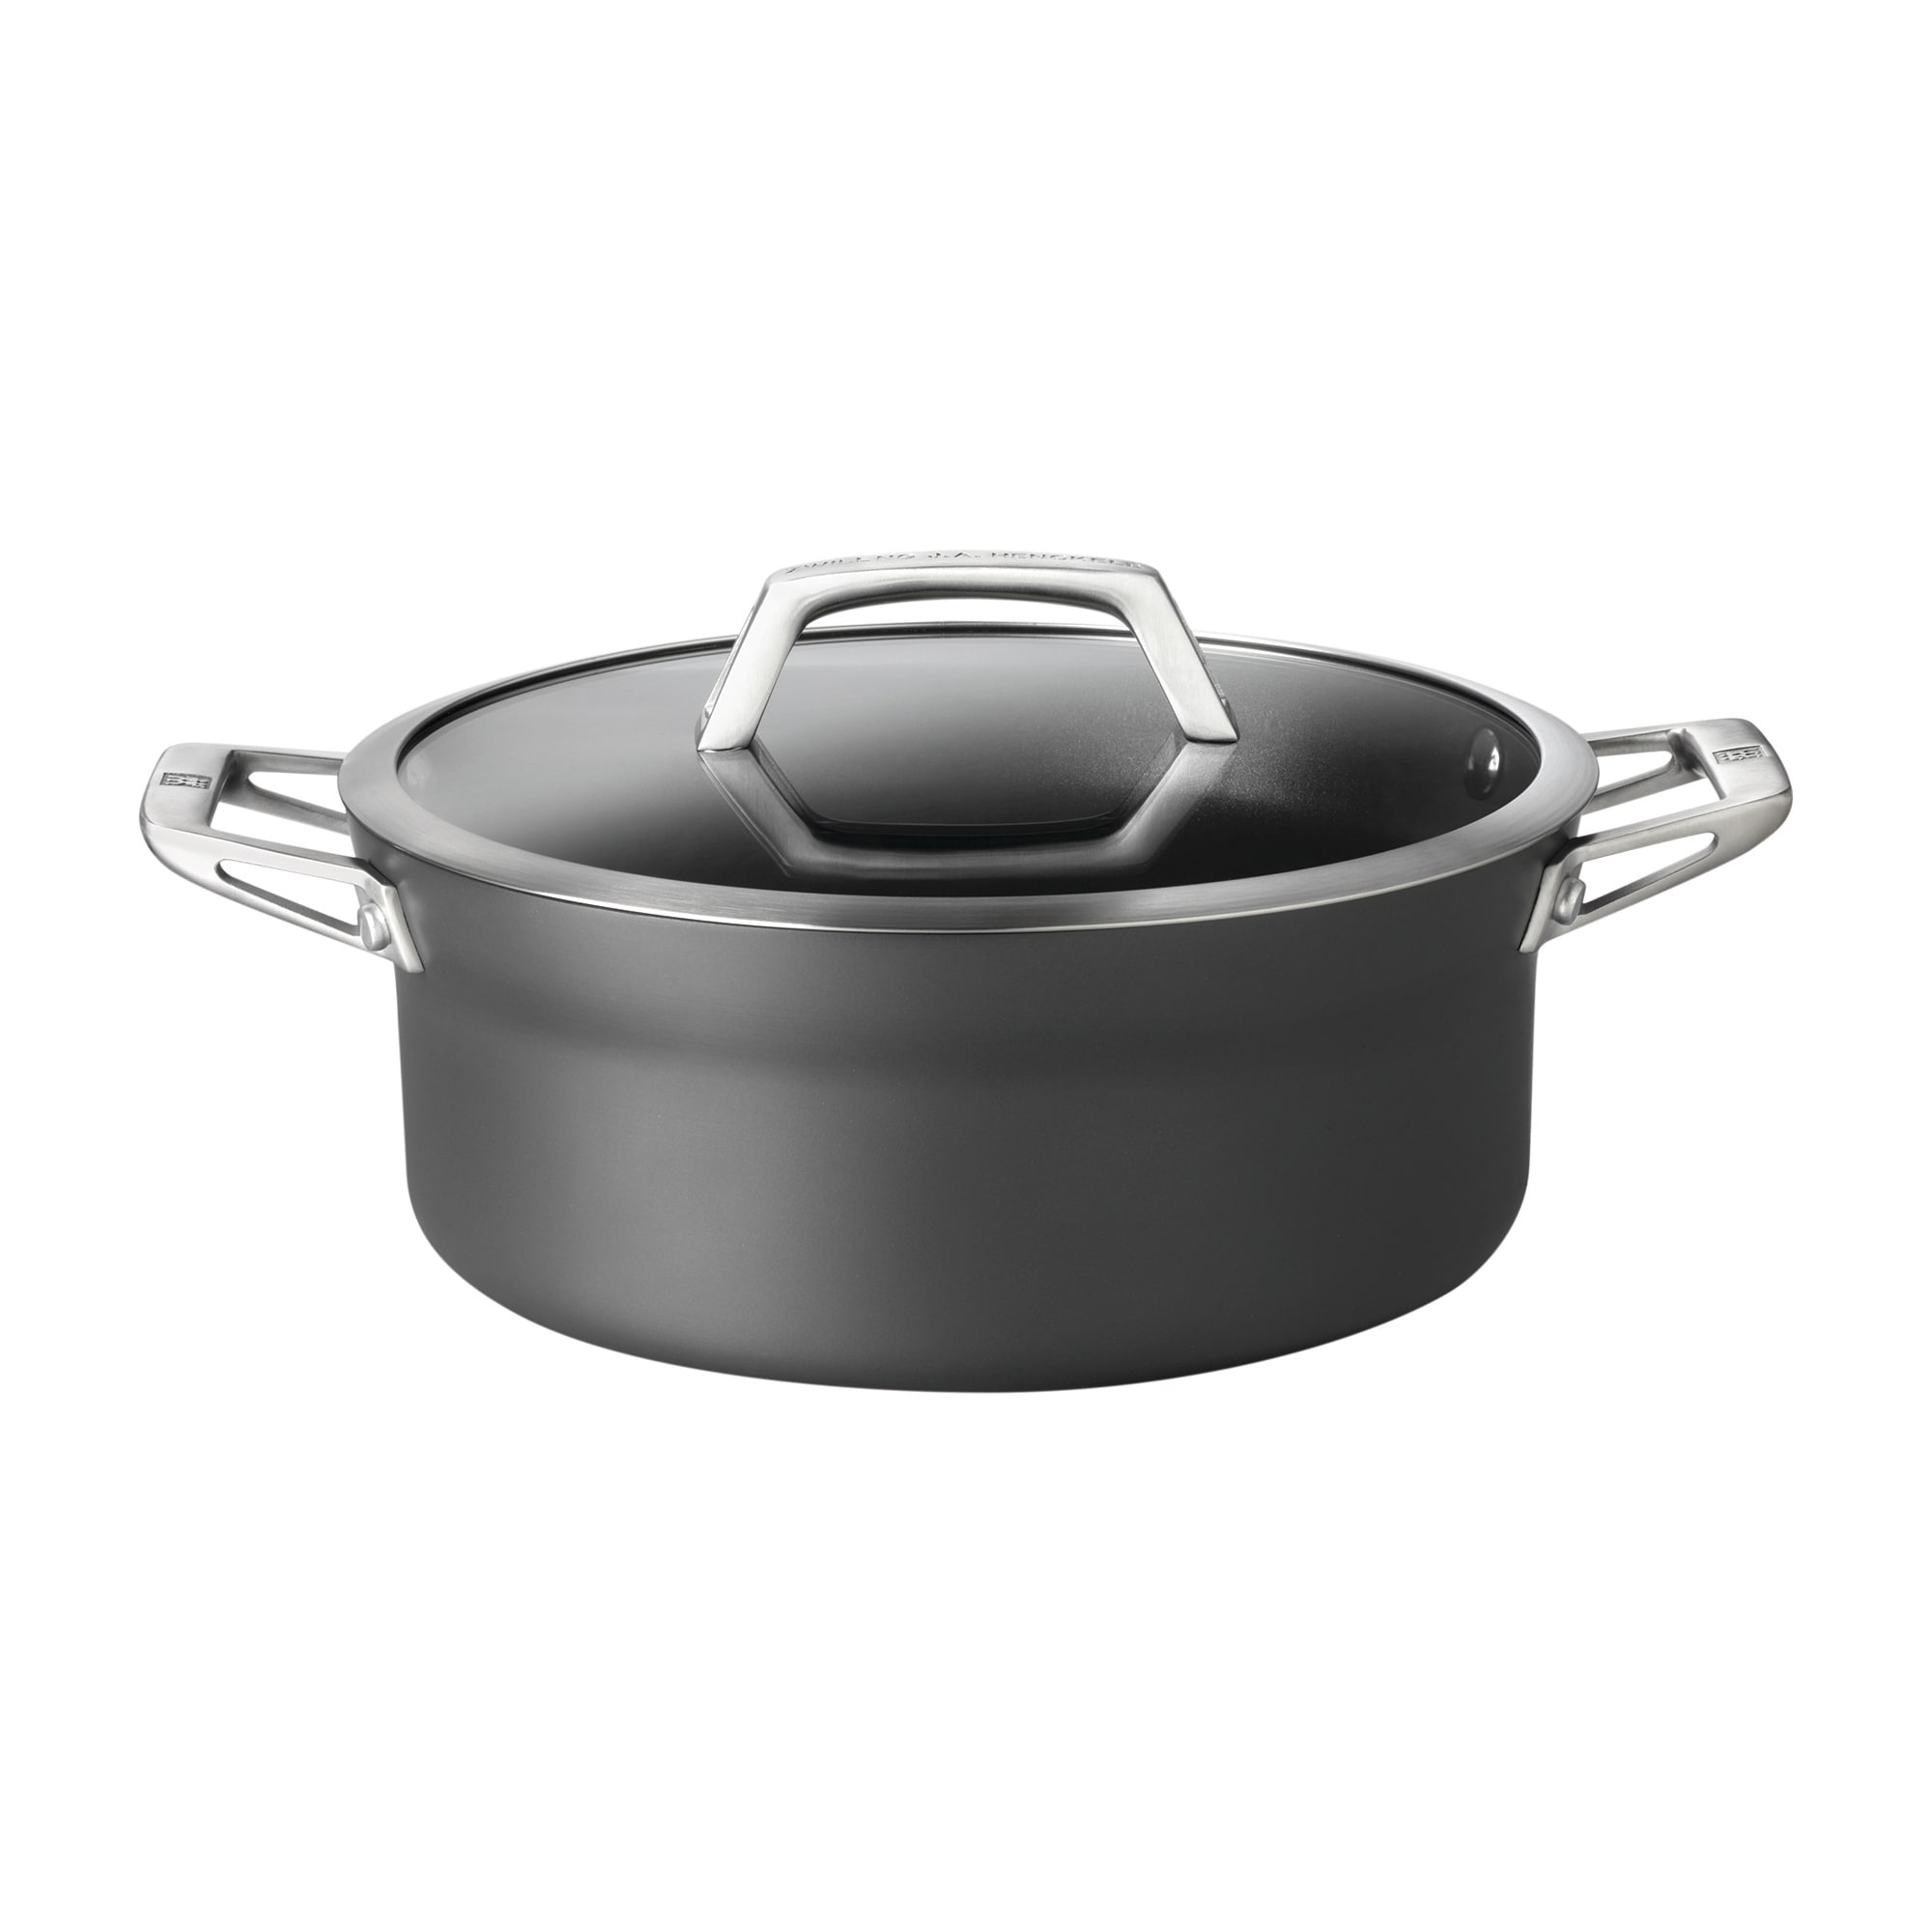 https://ak1.ostkcdn.com/images/products/is/images/direct/6d7627fffb377305a9324f6cdaf3407243ac153c/ZWILLING-Motion-Hard-Anodized-Aluminum-Nonstick-Dutch-Oven.jpg